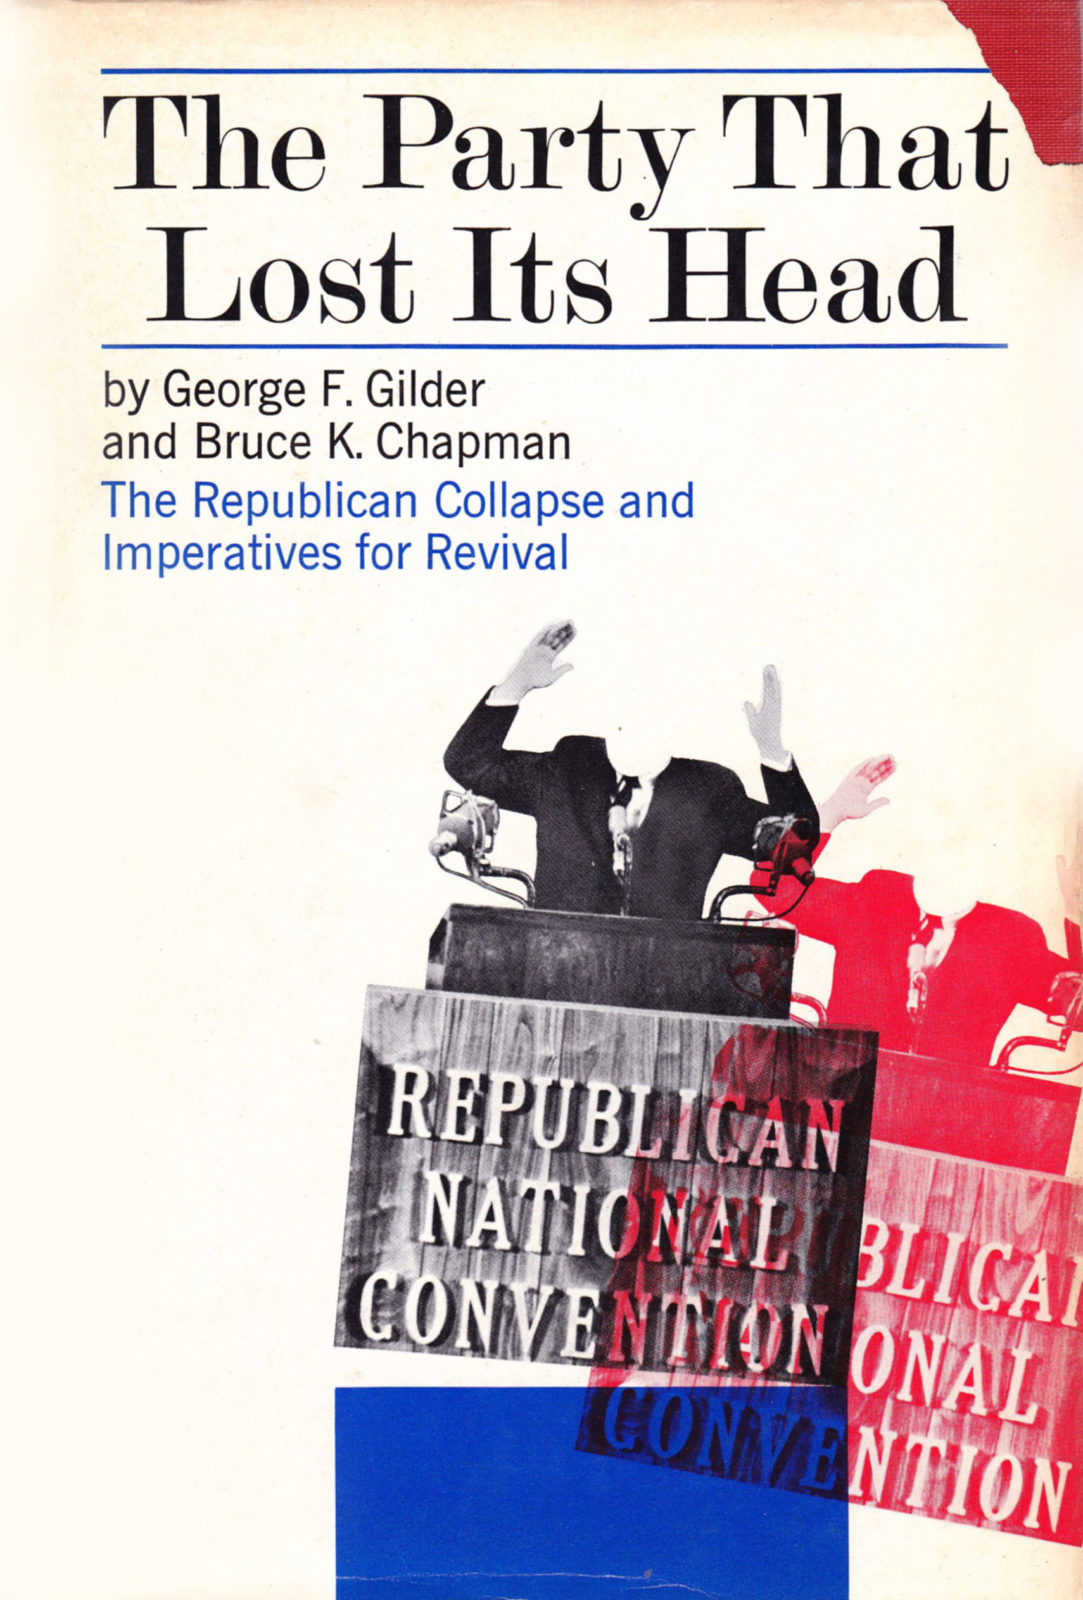 They Party that Lost Its Head by George Gilder and Bruce Chapman